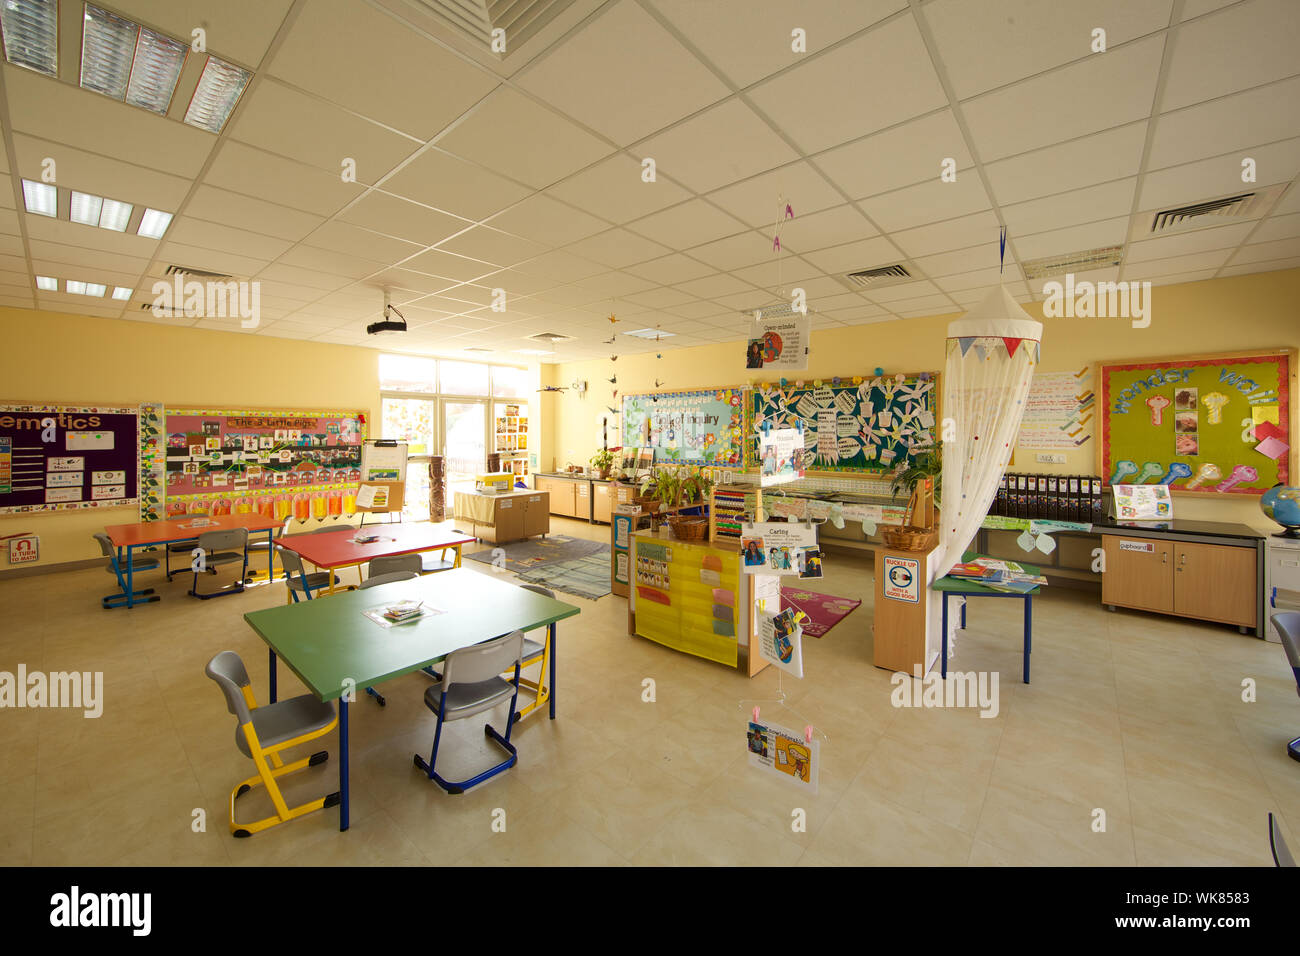 Interiors of a playschool Stock Photo